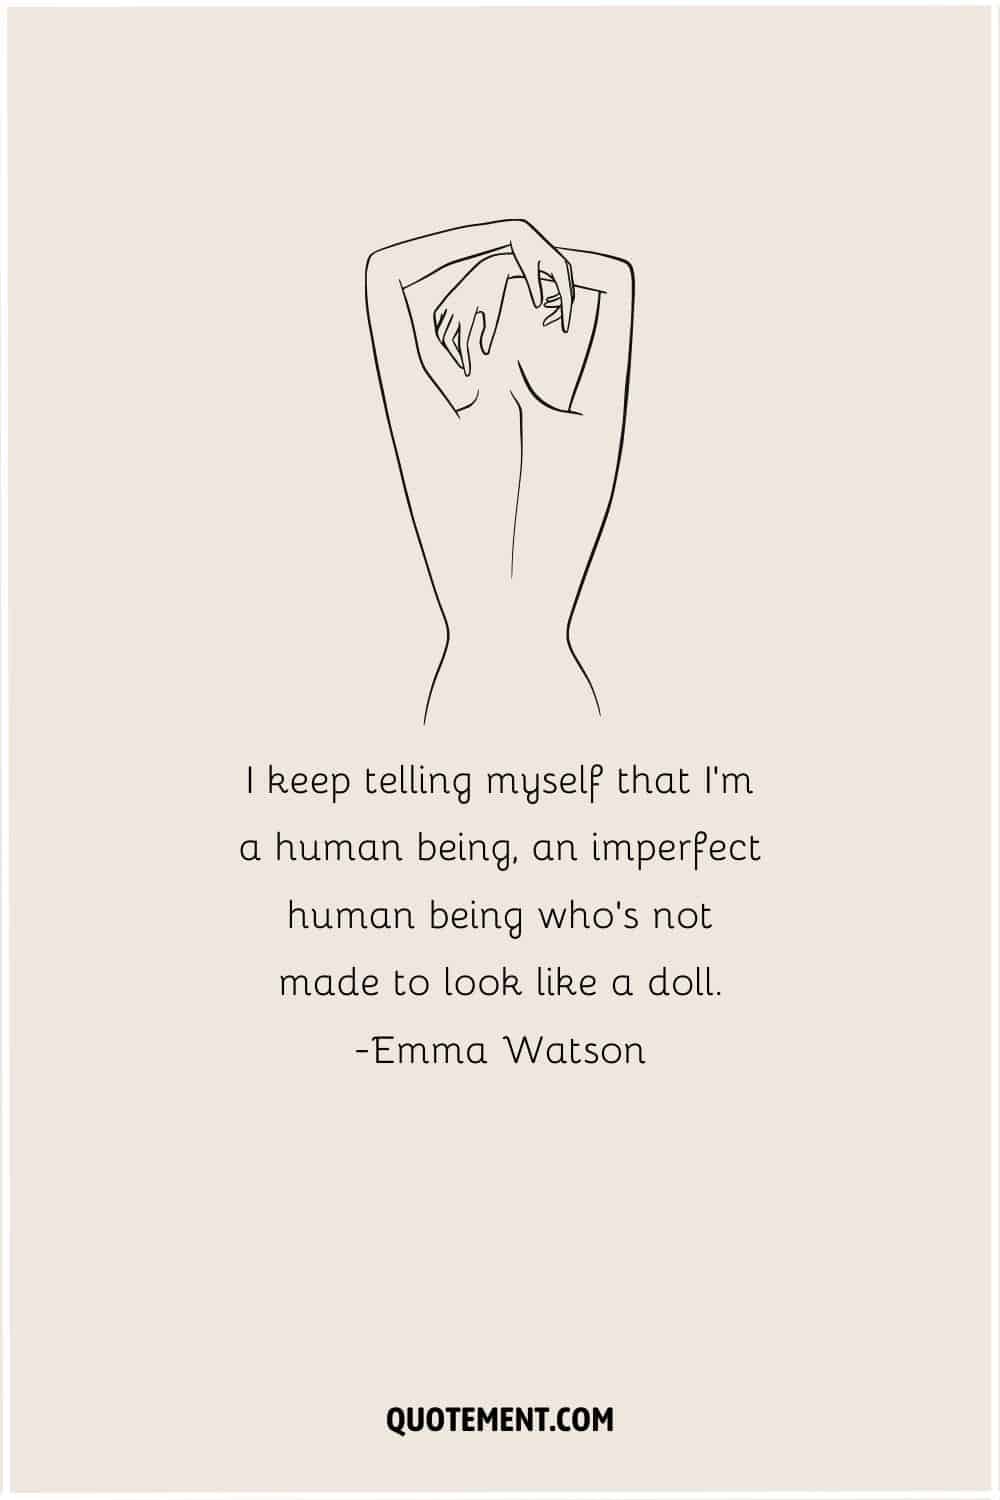 I keep telling myself that I’m a human being, an imperfect human being who’s not made to look like a doll